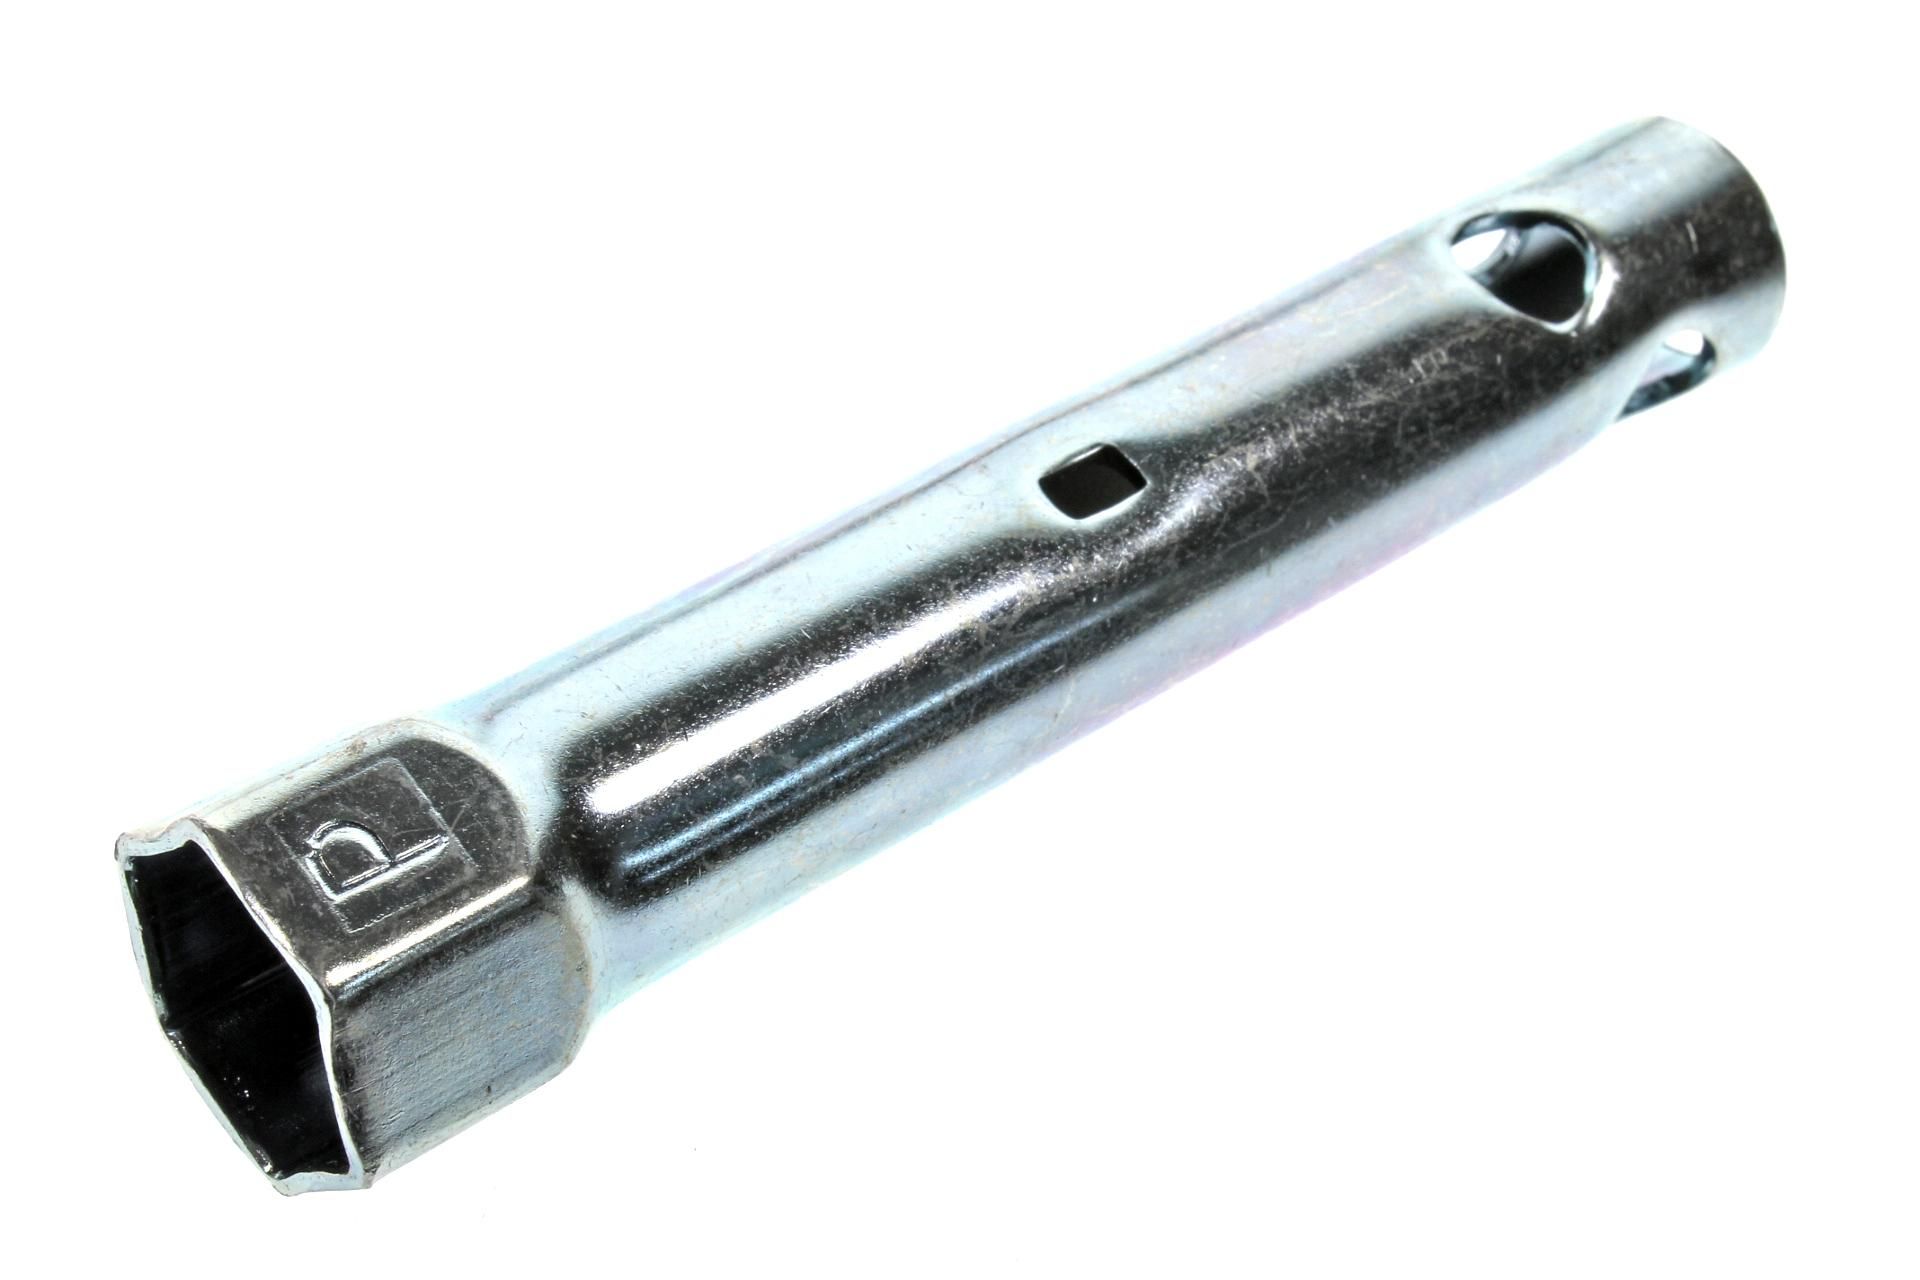 89217-KB7-940 BOX WRENCH